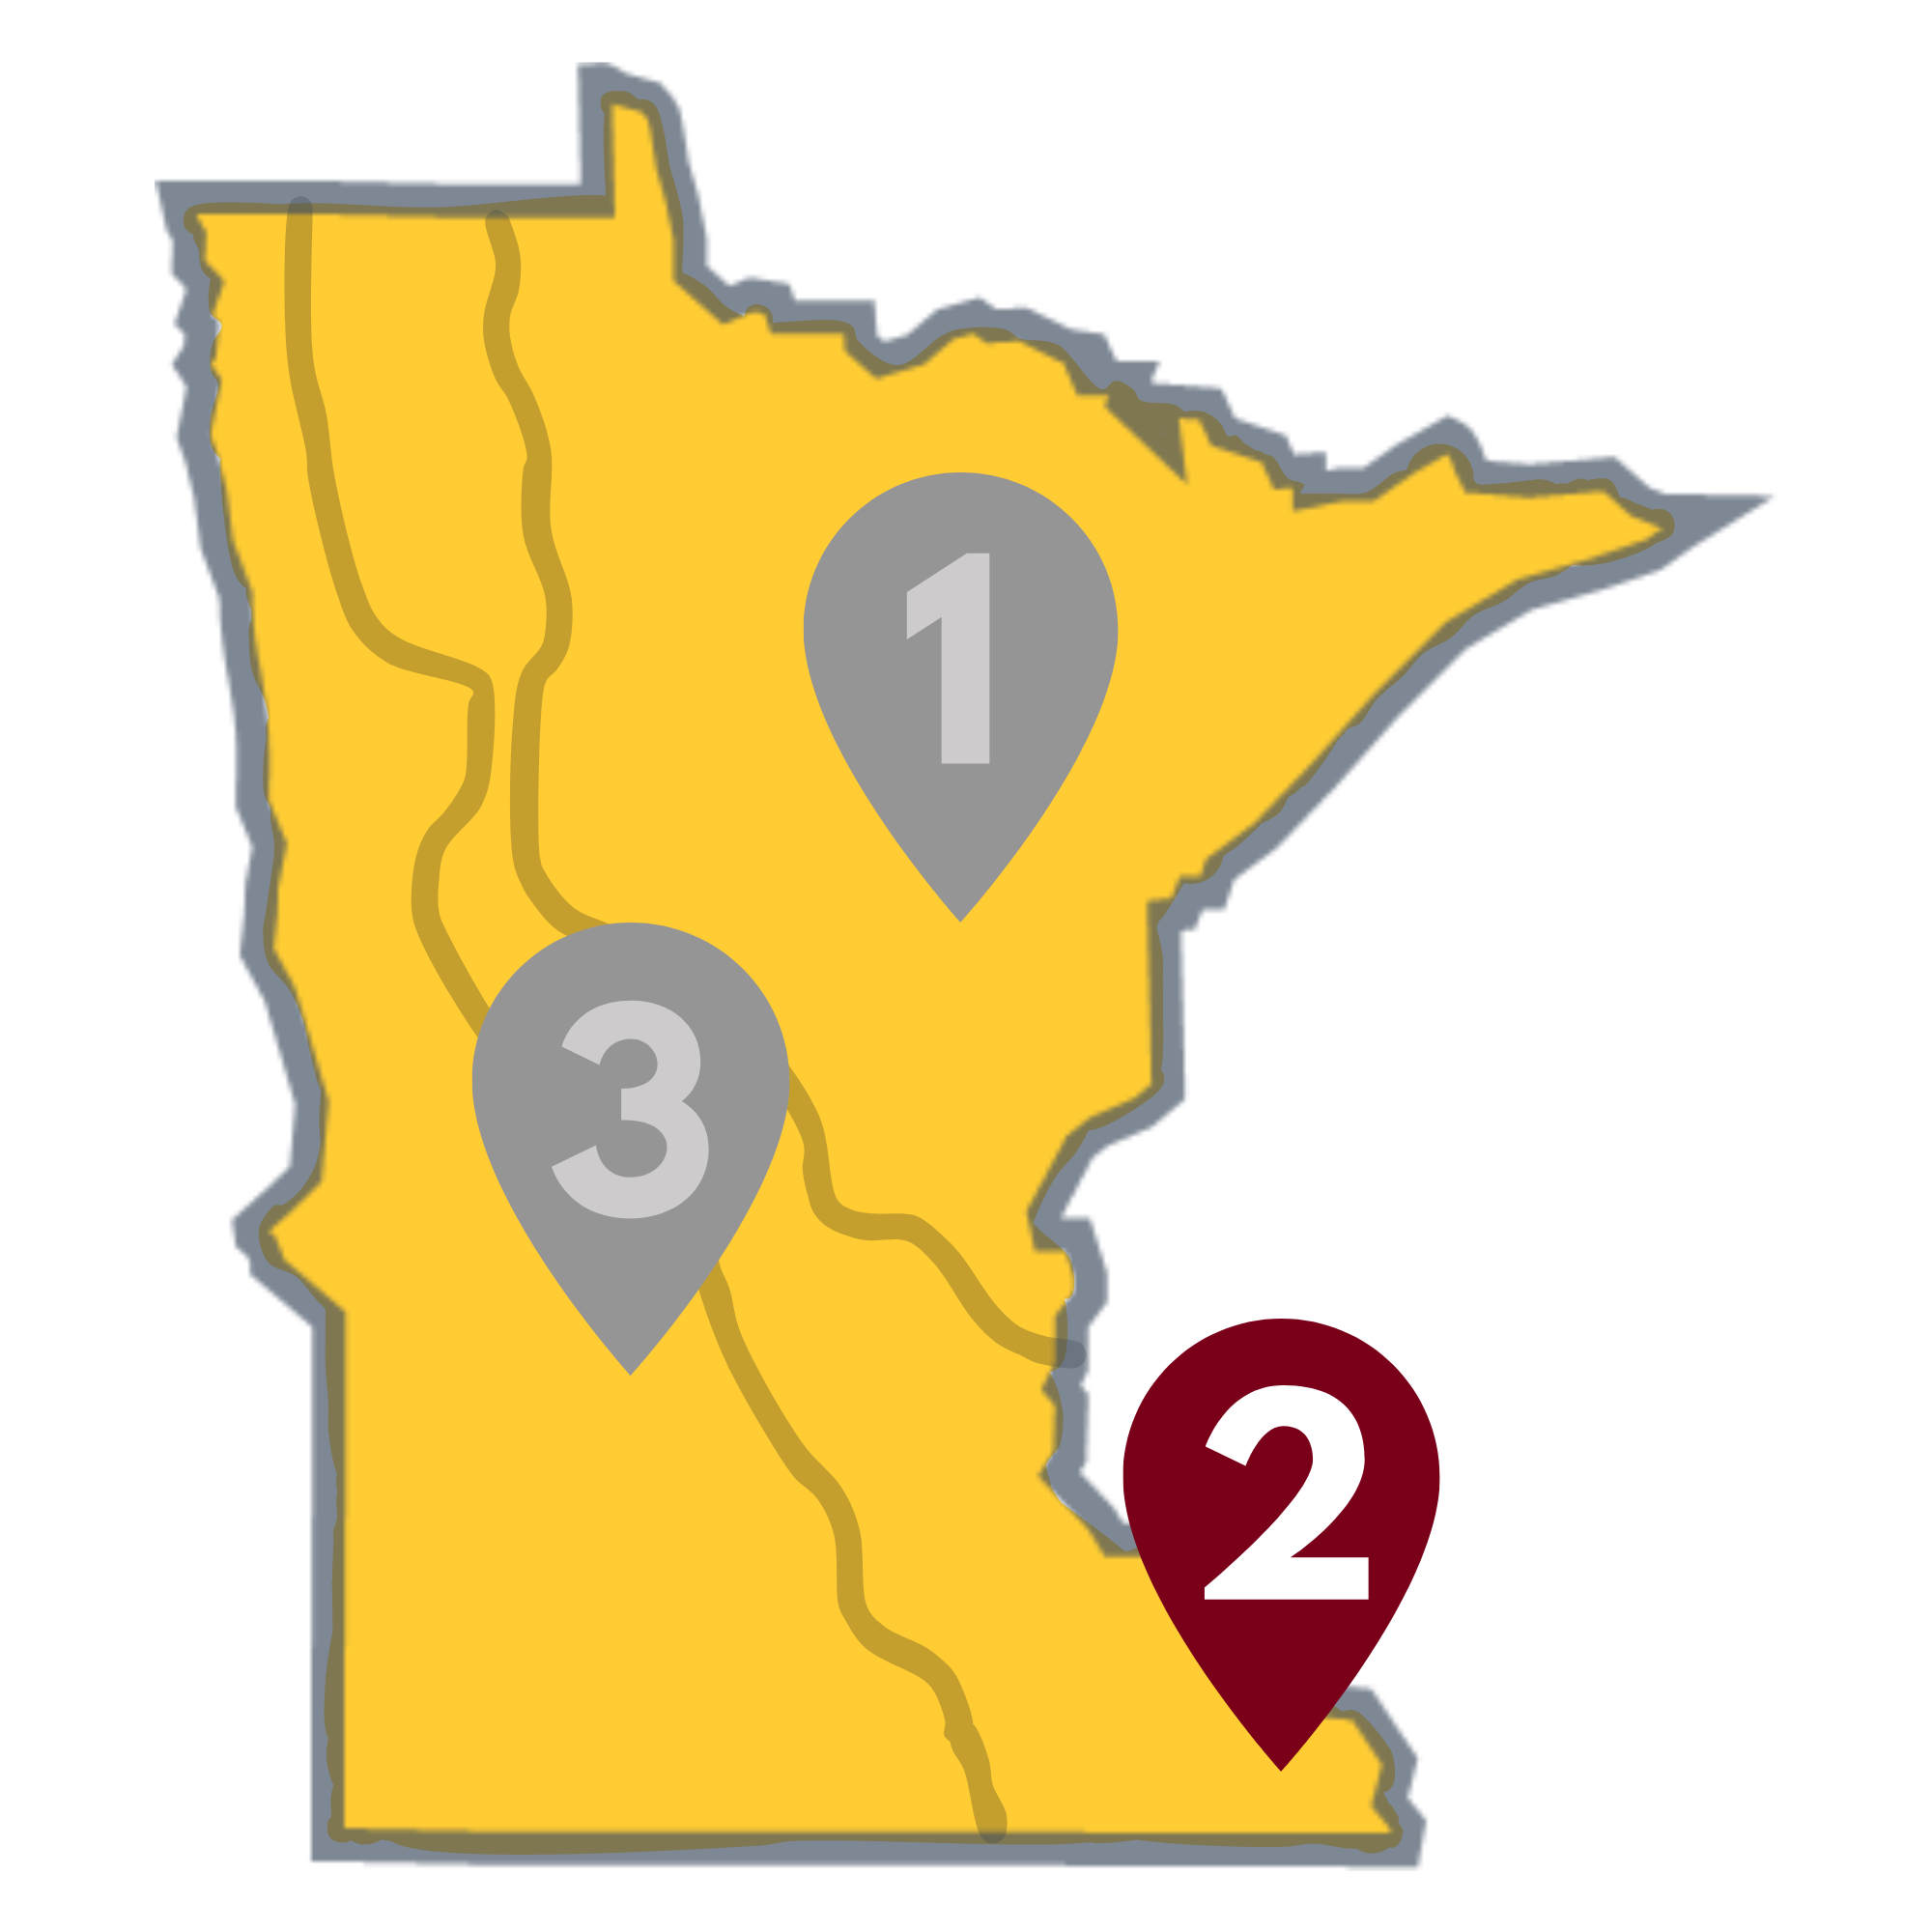 Yellow state of Minnesota with a maroon place marker (2) in the southeast.